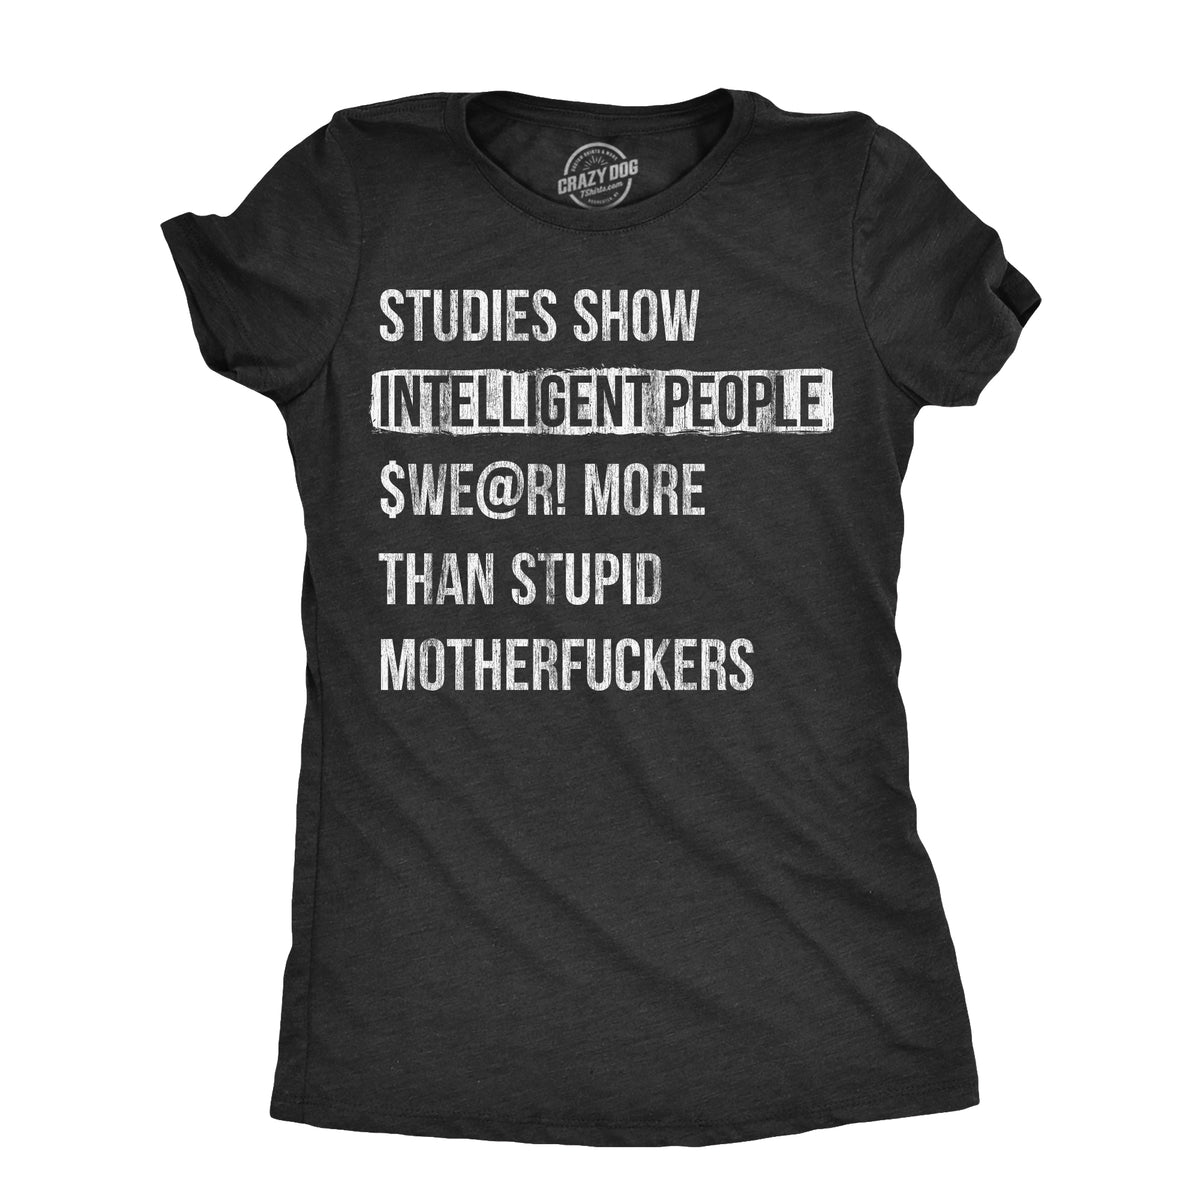 Funny Heather Black - SWEAR Studies Show That Intelligent People Swear More Than Stupid Mother Fuckers Womens T Shirt Nerdy sarcastic Tee